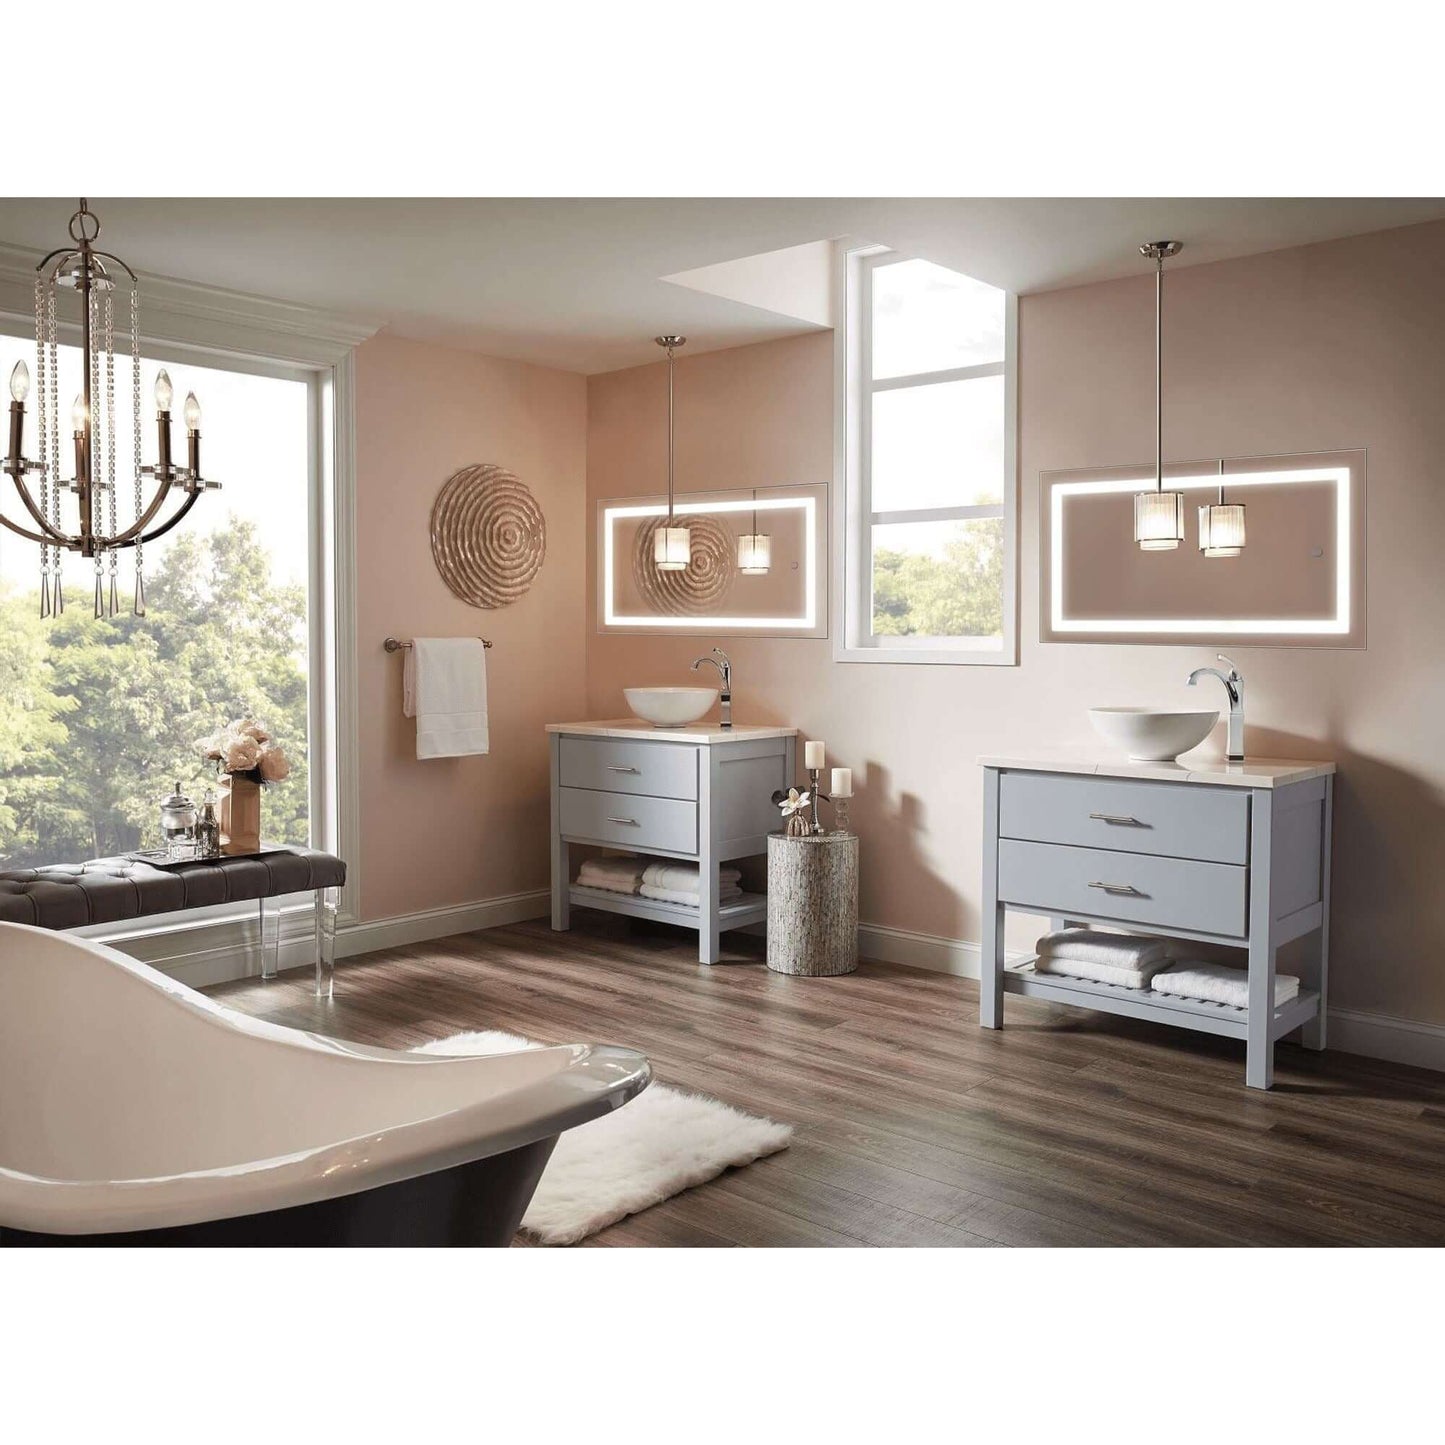 Elegant bathroom with Krugg LED icon 22442 mirrors, gray vanities, and a chandelier